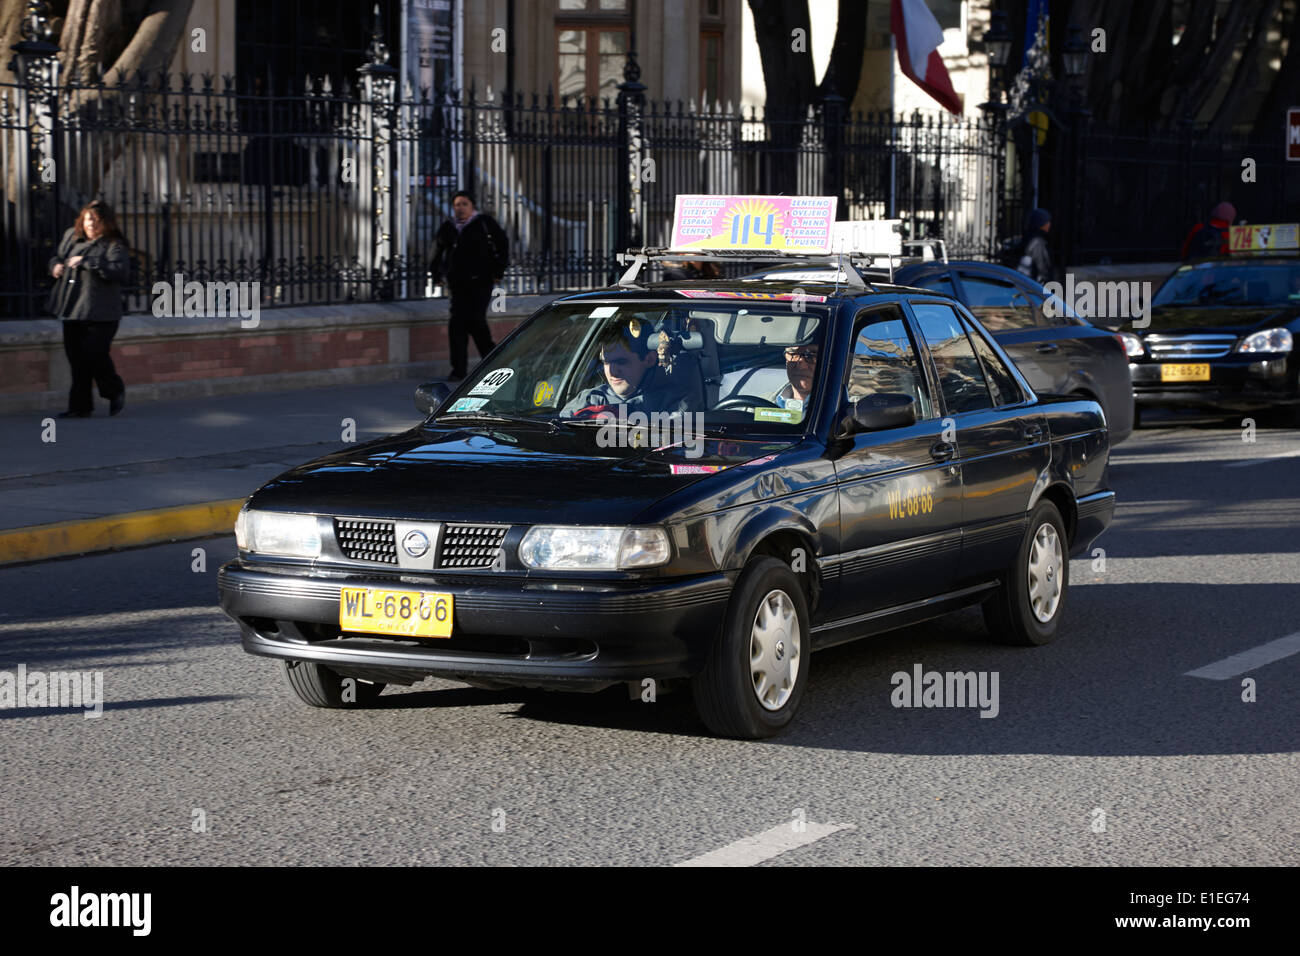 local colectivos taxis acting as a small bus transport service Punta Arenas Chile Stock Photo